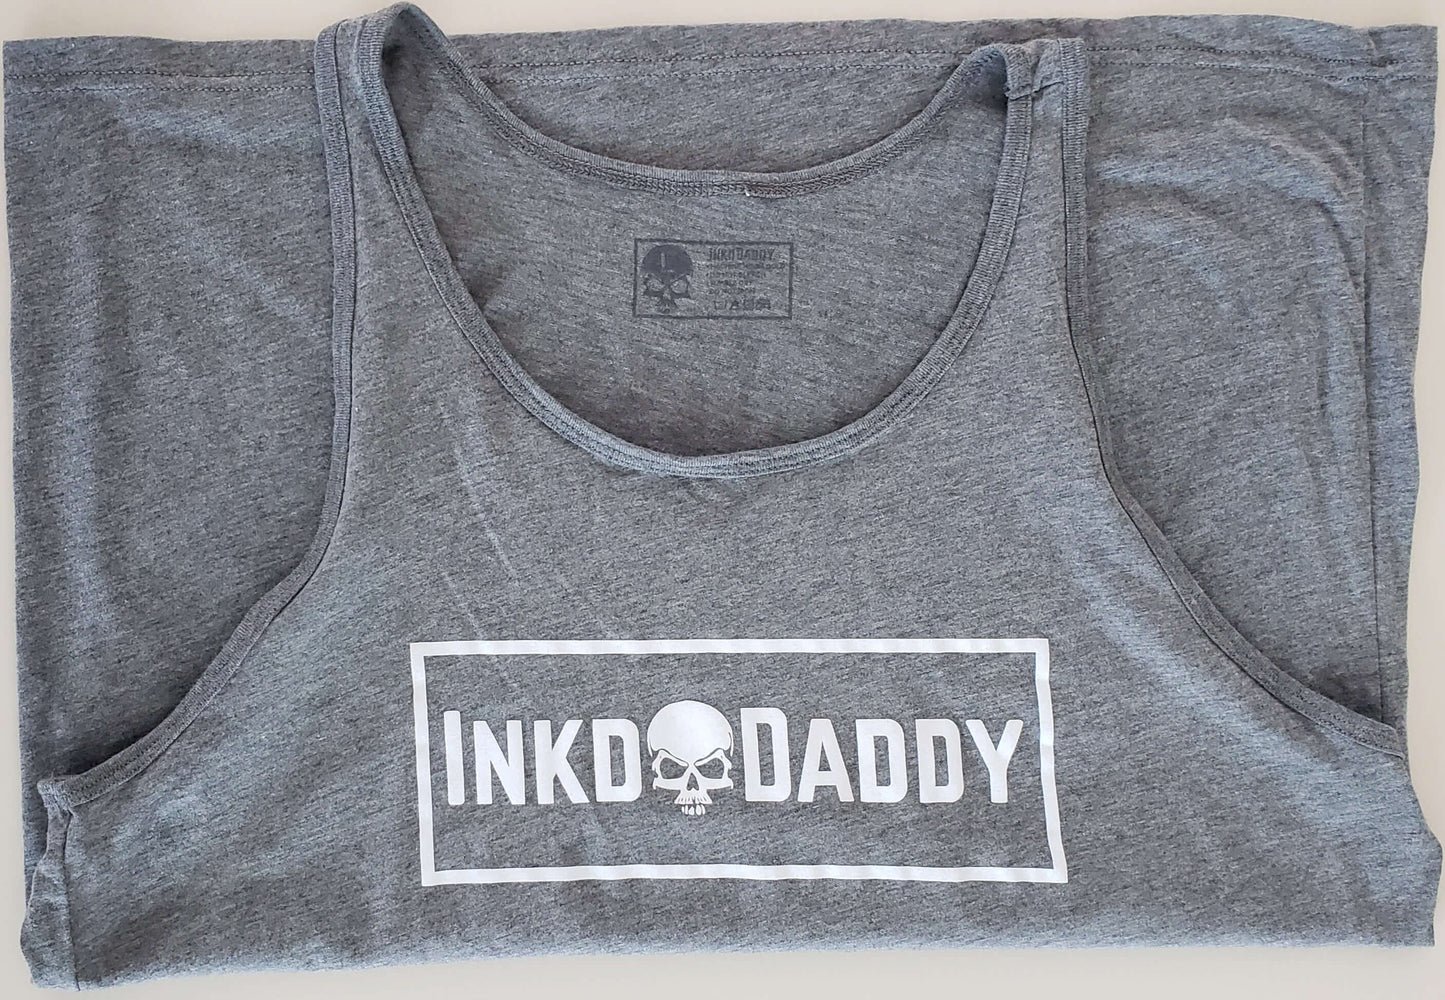 Inkddaddy skull on hats and shirts multiple colors